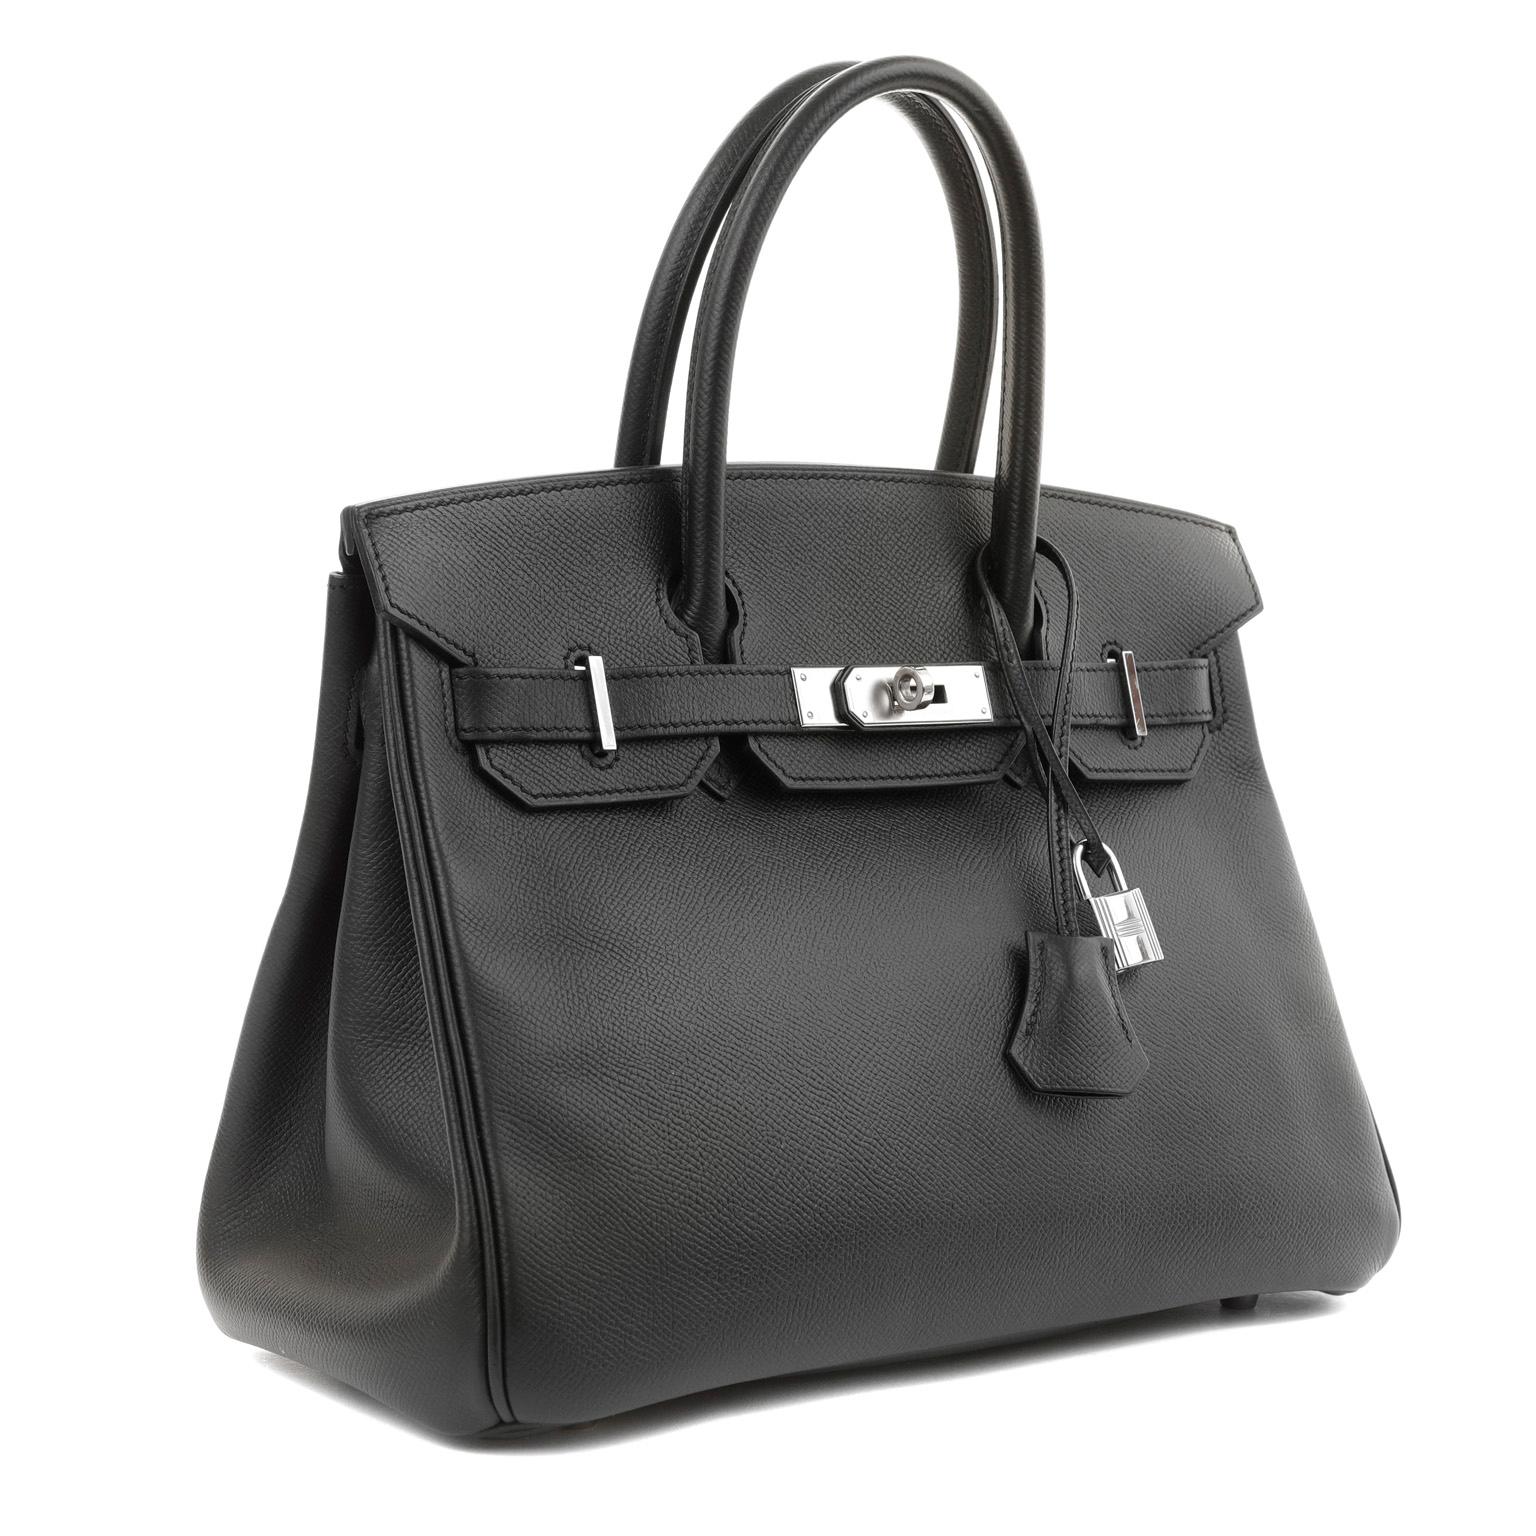 This authentic Hermès Black Epsom 30 cm Birkin is in pristine unworn condition; the protective plastic is still intact on the hardware.    Considered the ultimate luxury item, the Hermès Birkin is stitched by hand. Waitlists exceeding a year are